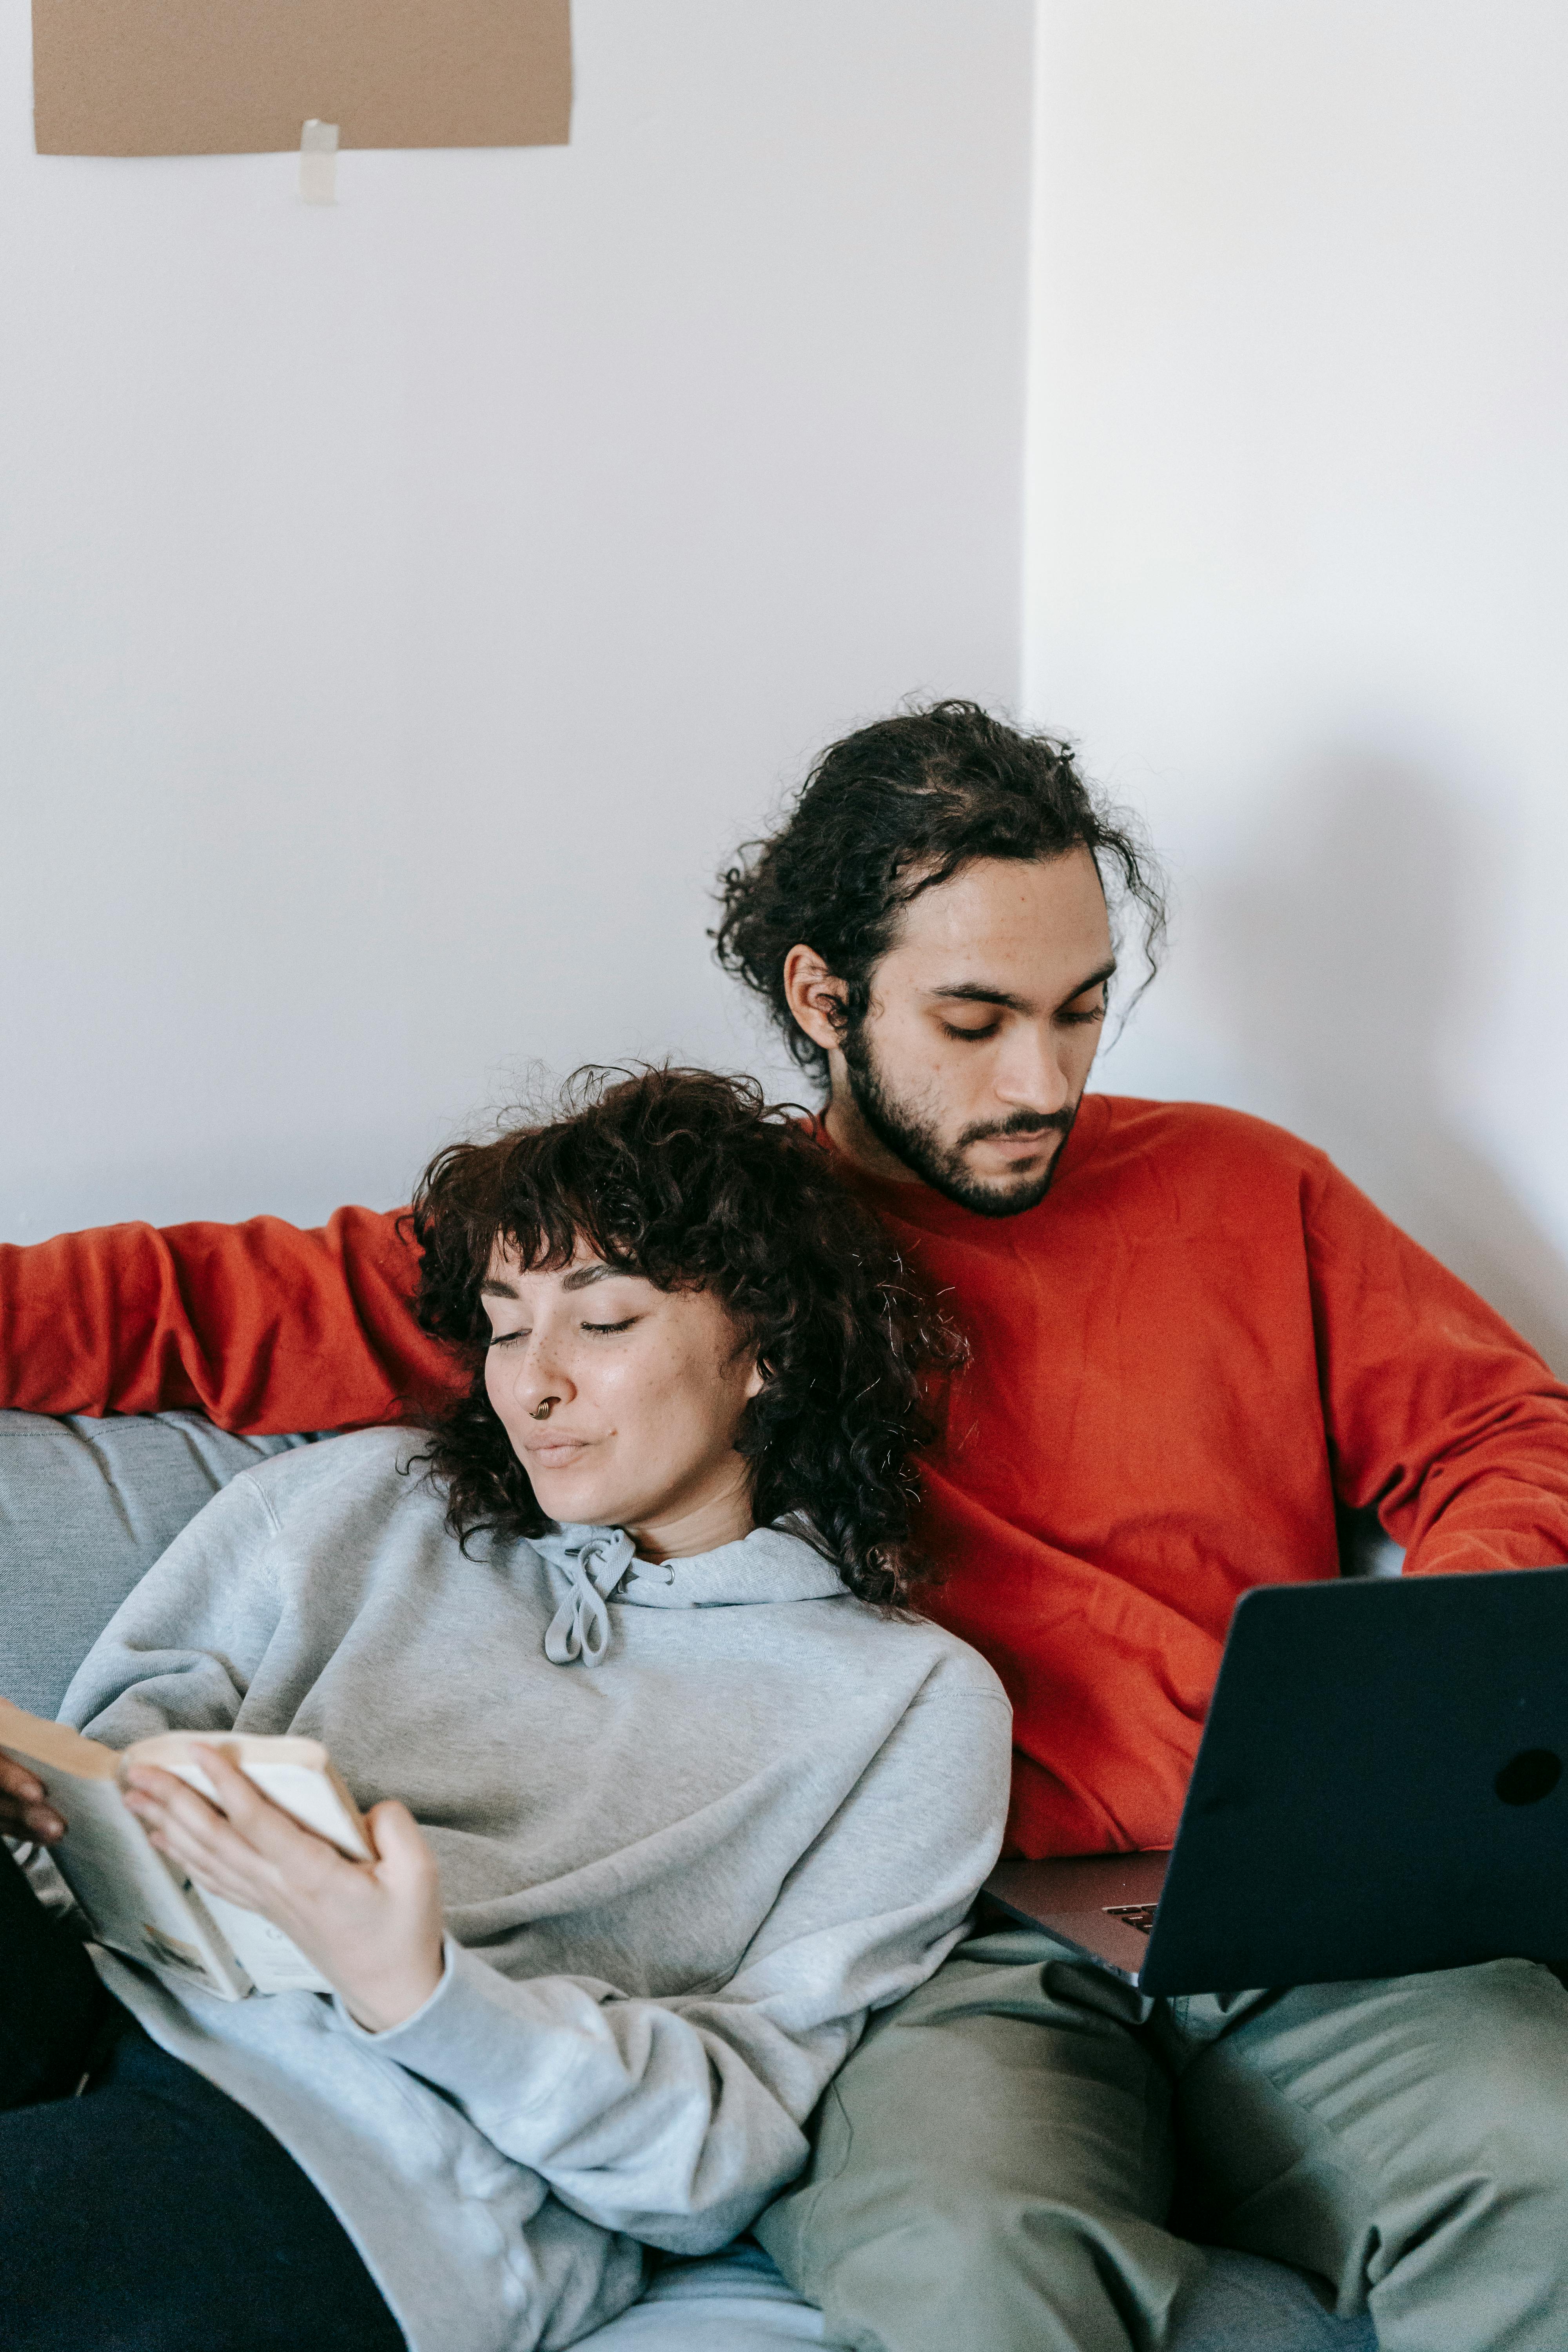 ethnic couple with laptop and book resting on sofa